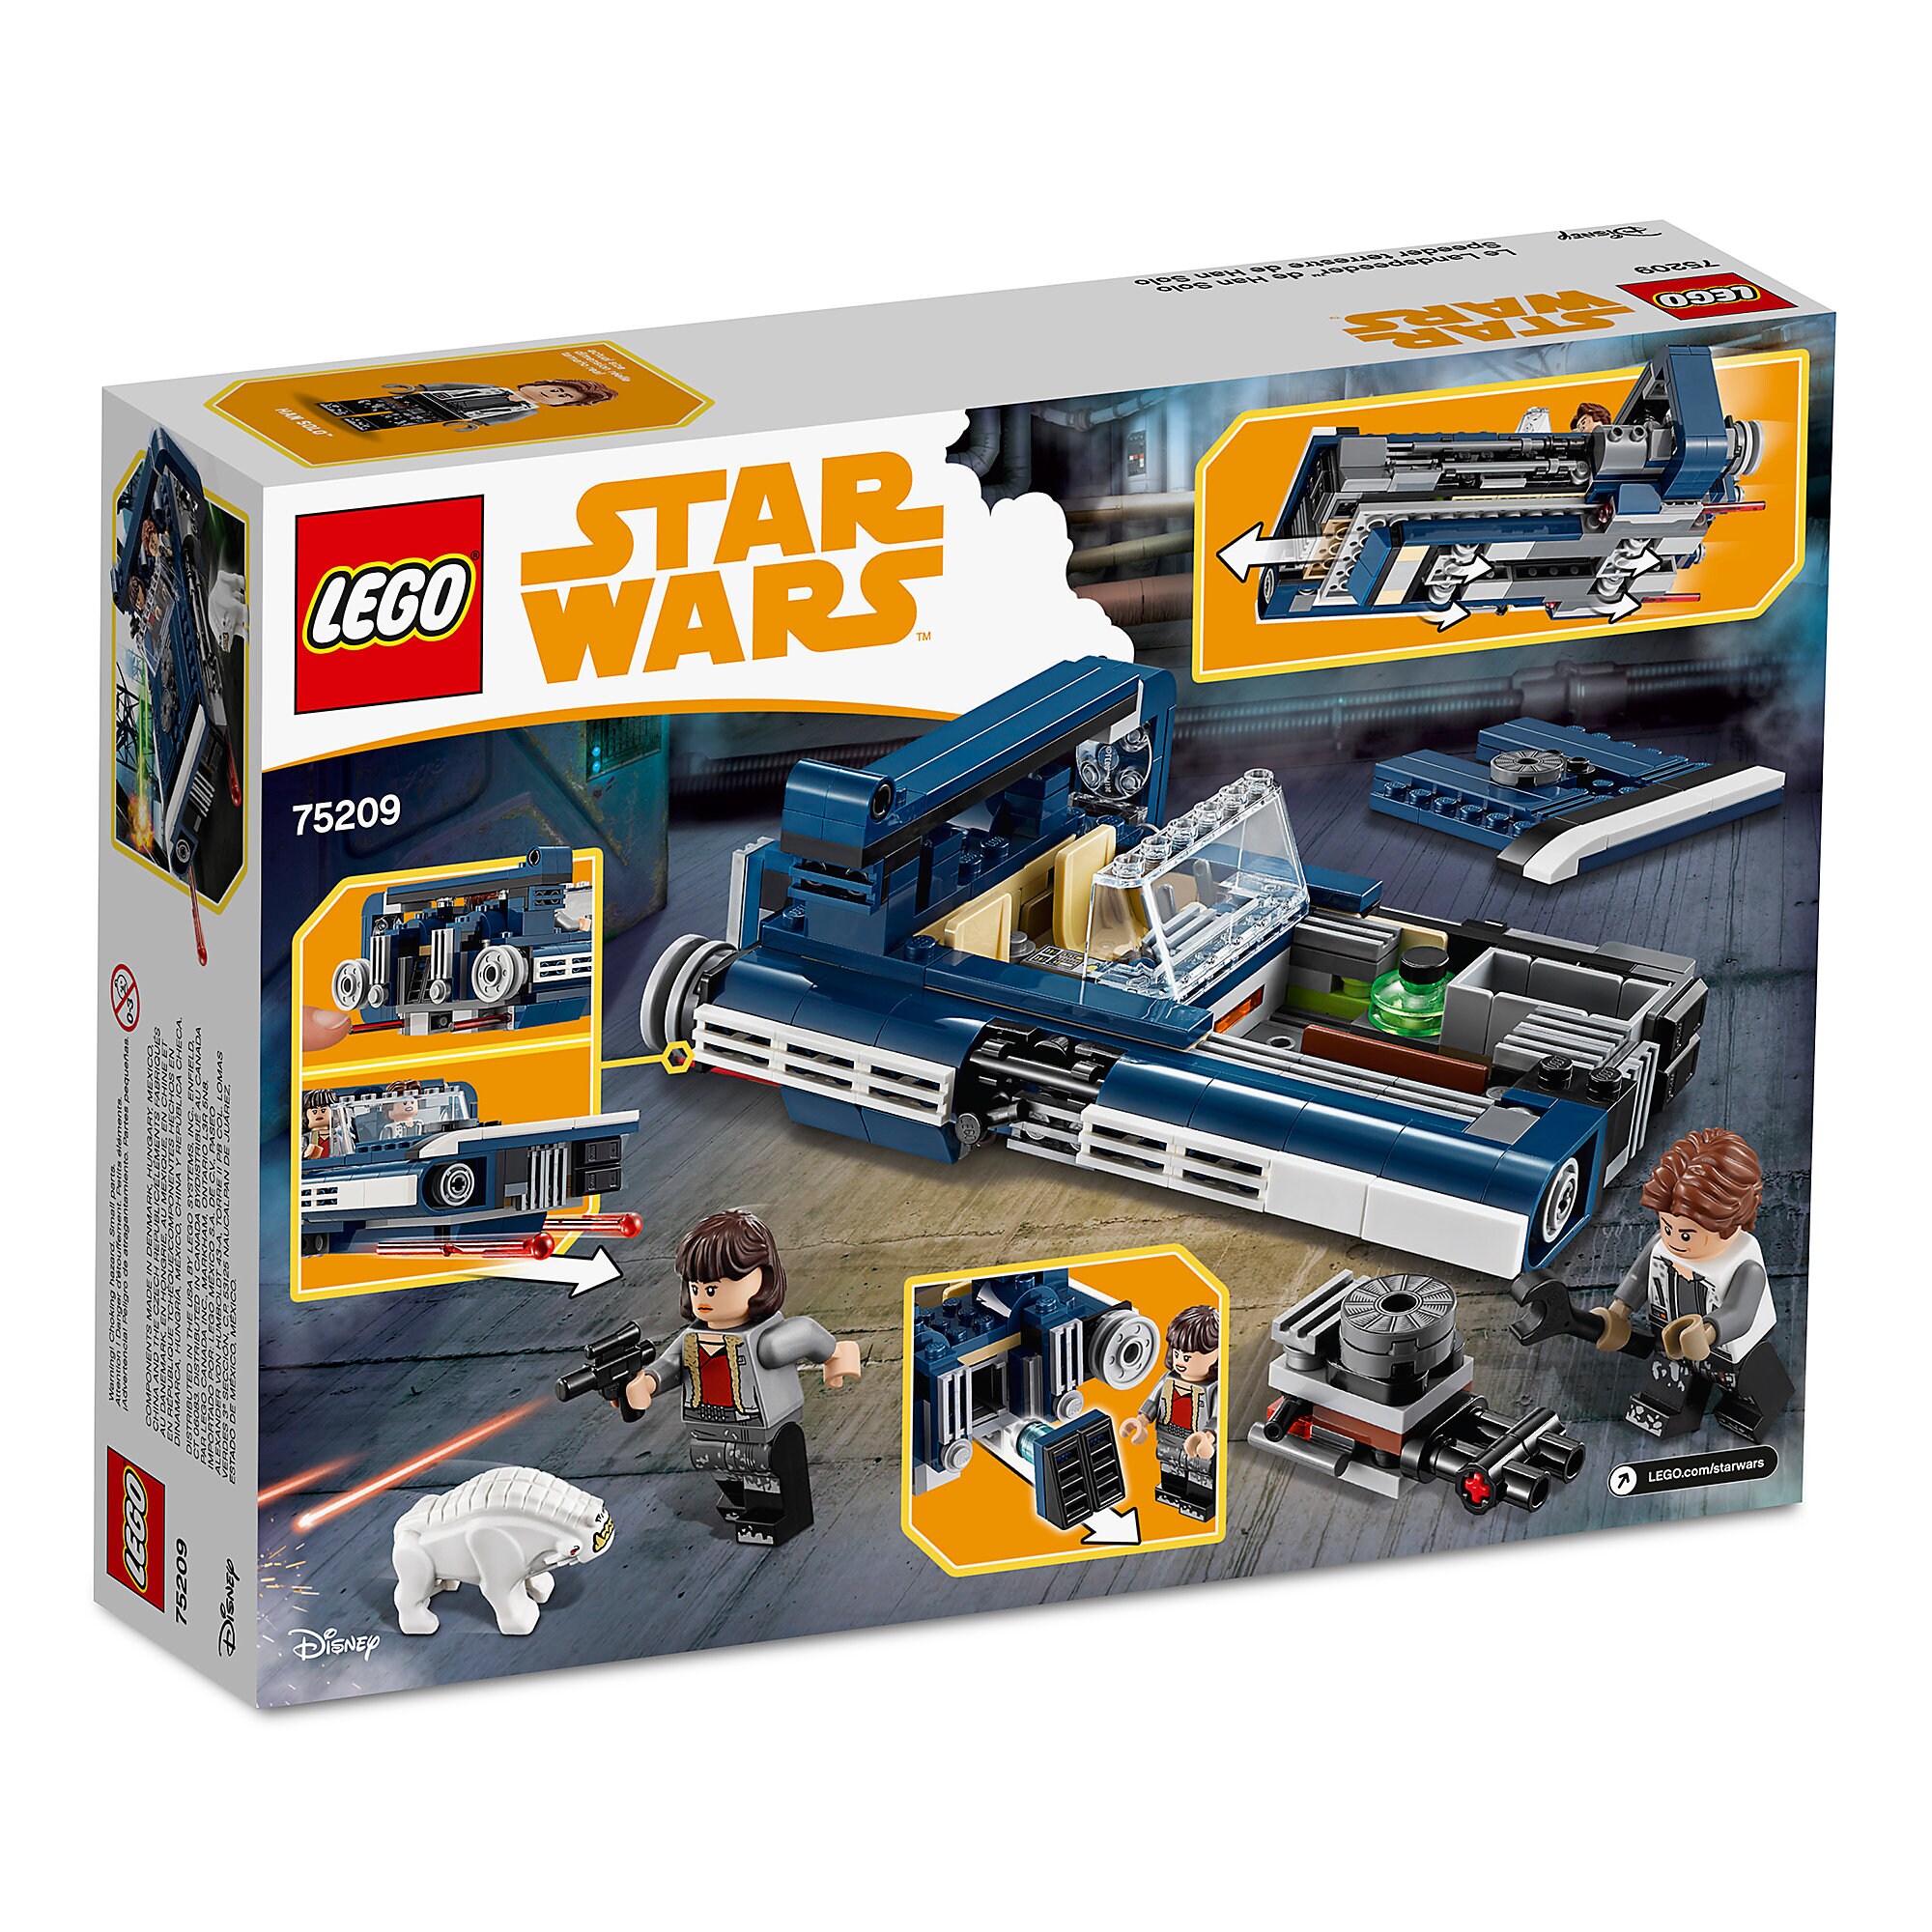 Han Solo Landspeeder Playset by LEGO - Solo: A Star Wars Story